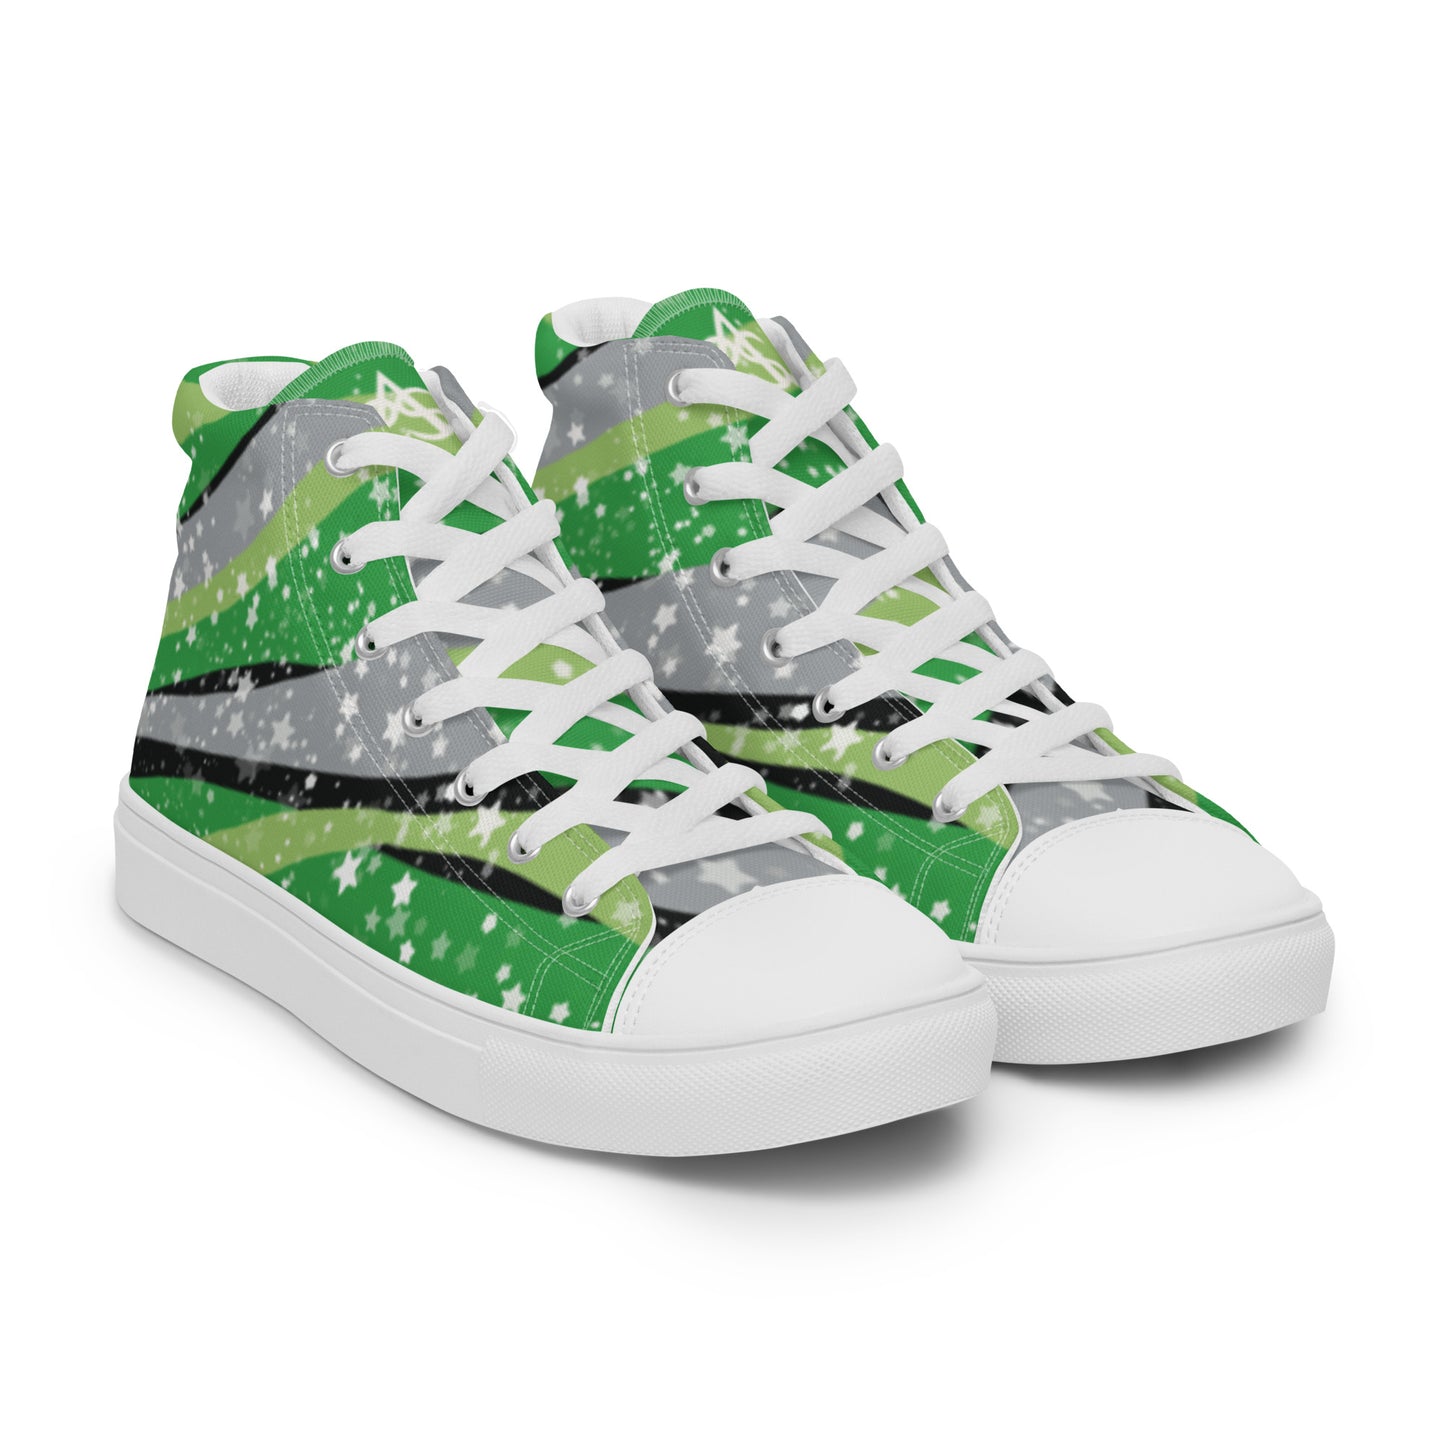 Right front view: a pair of high-top shoes with ribbons of the greens, grey, and black of the aromantic pride flag coming from the heel and expanding towards the laces with an explosion of stars over it, white accents, and the Aras Sivad Studio logo in white on the tongue.